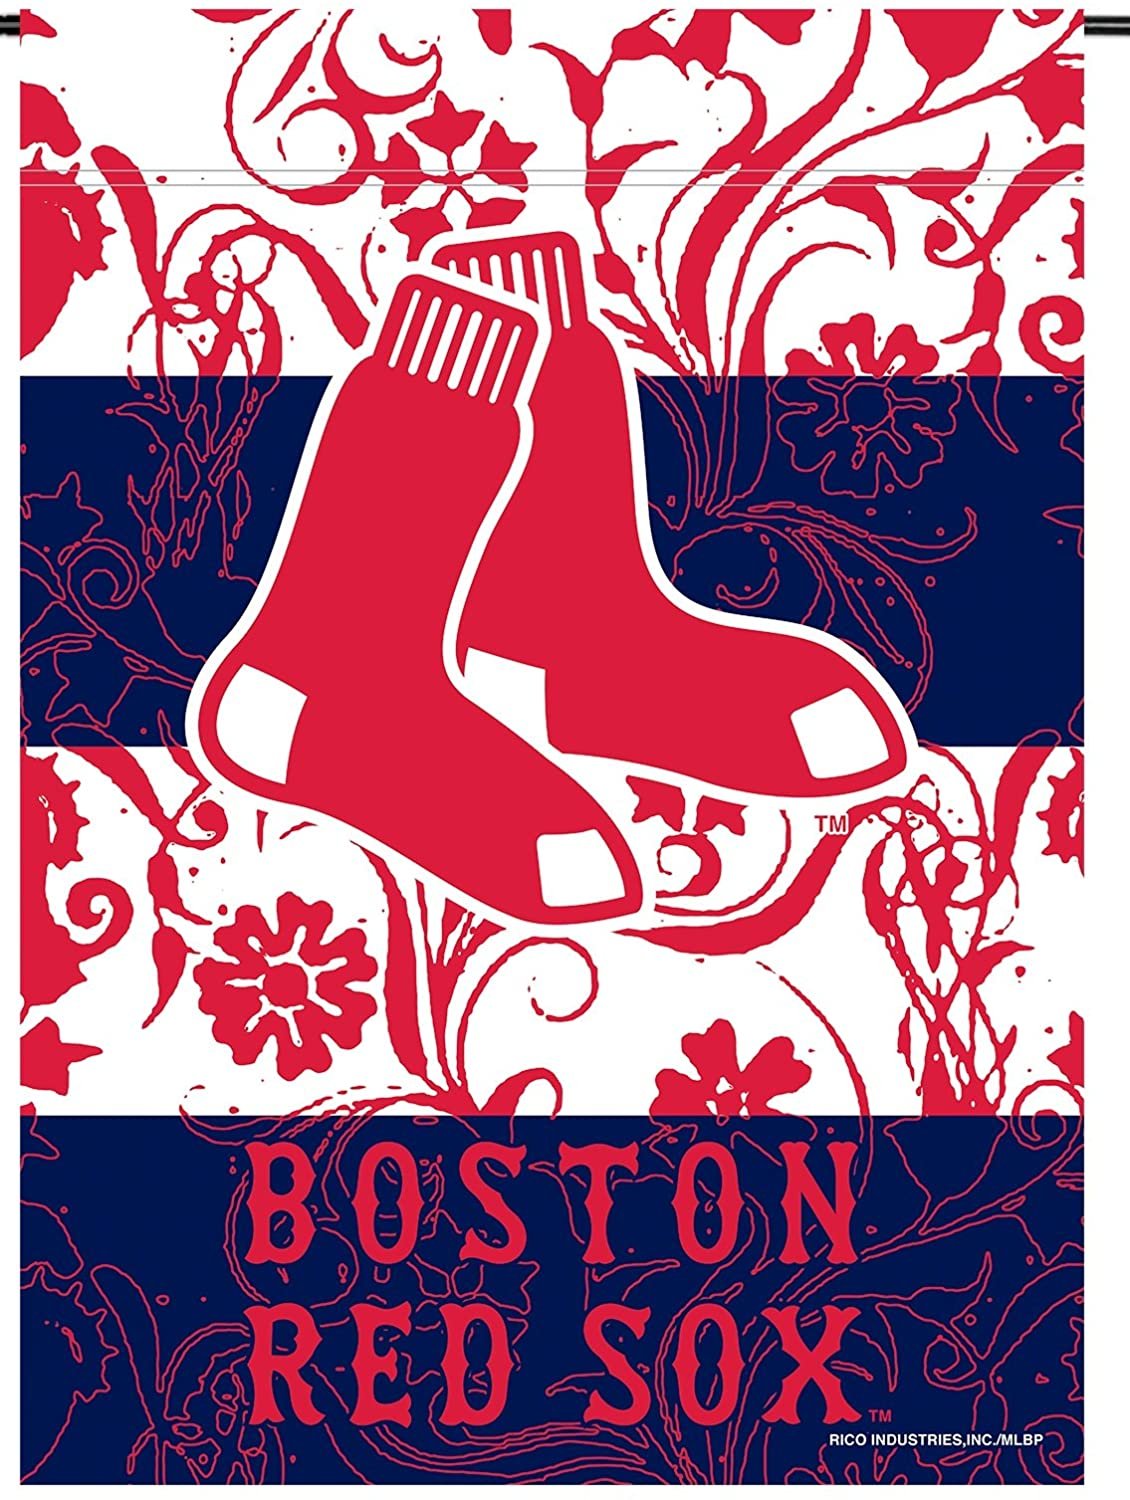 Boston Red Sox Premium Garden Flag Banner, Double Sided, 13x18 Inch